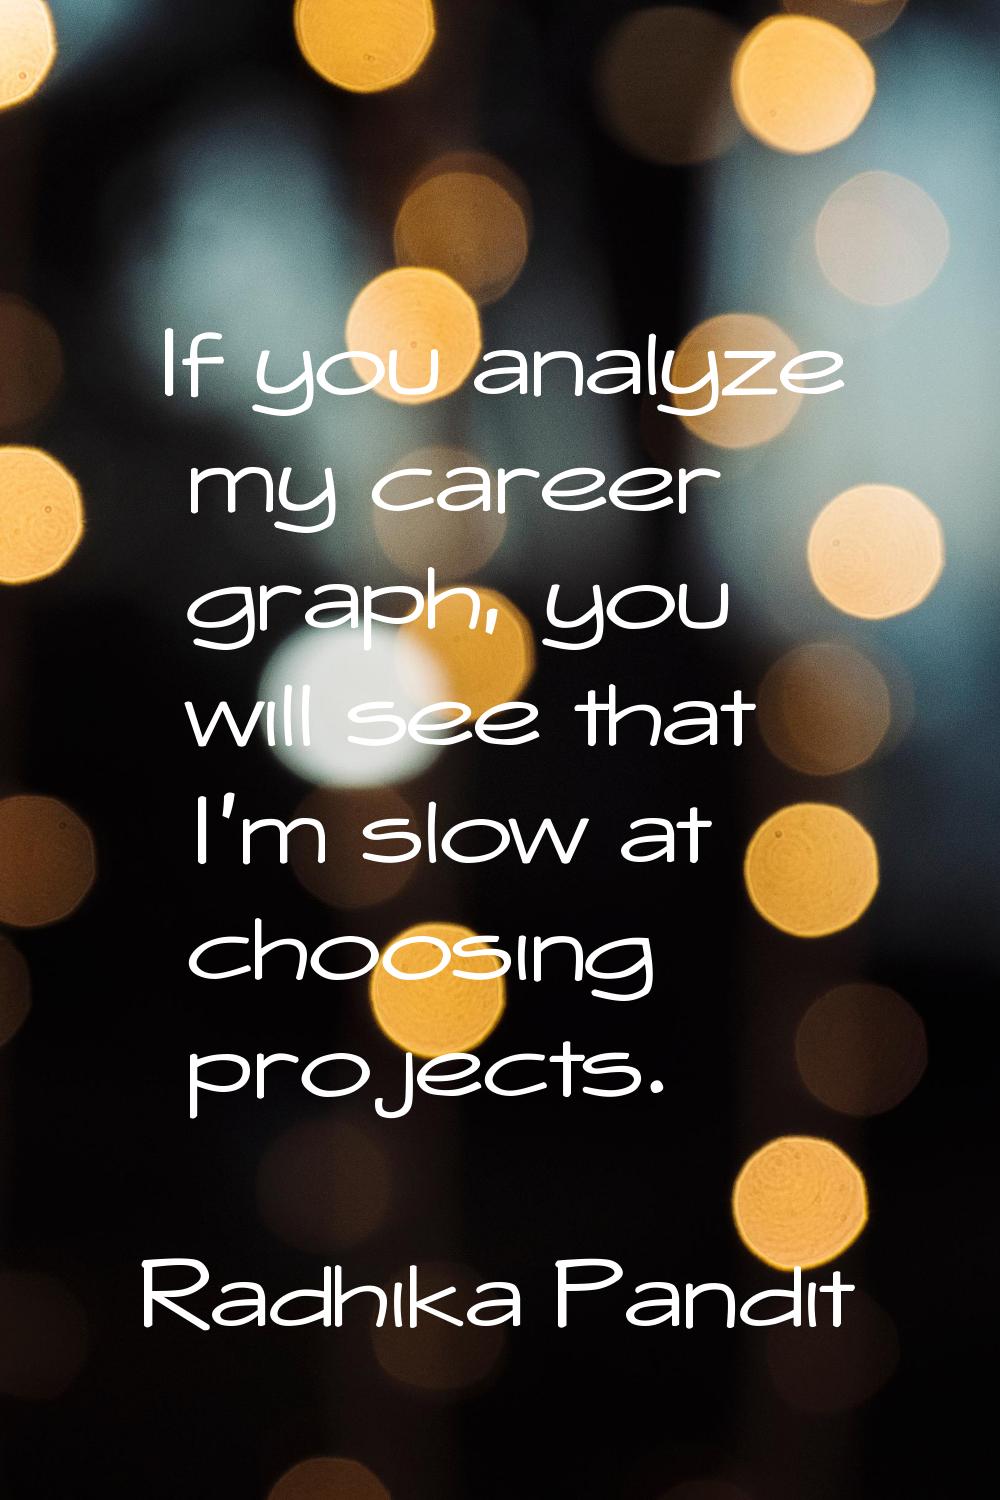 If you analyze my career graph, you will see that I'm slow at choosing projects.